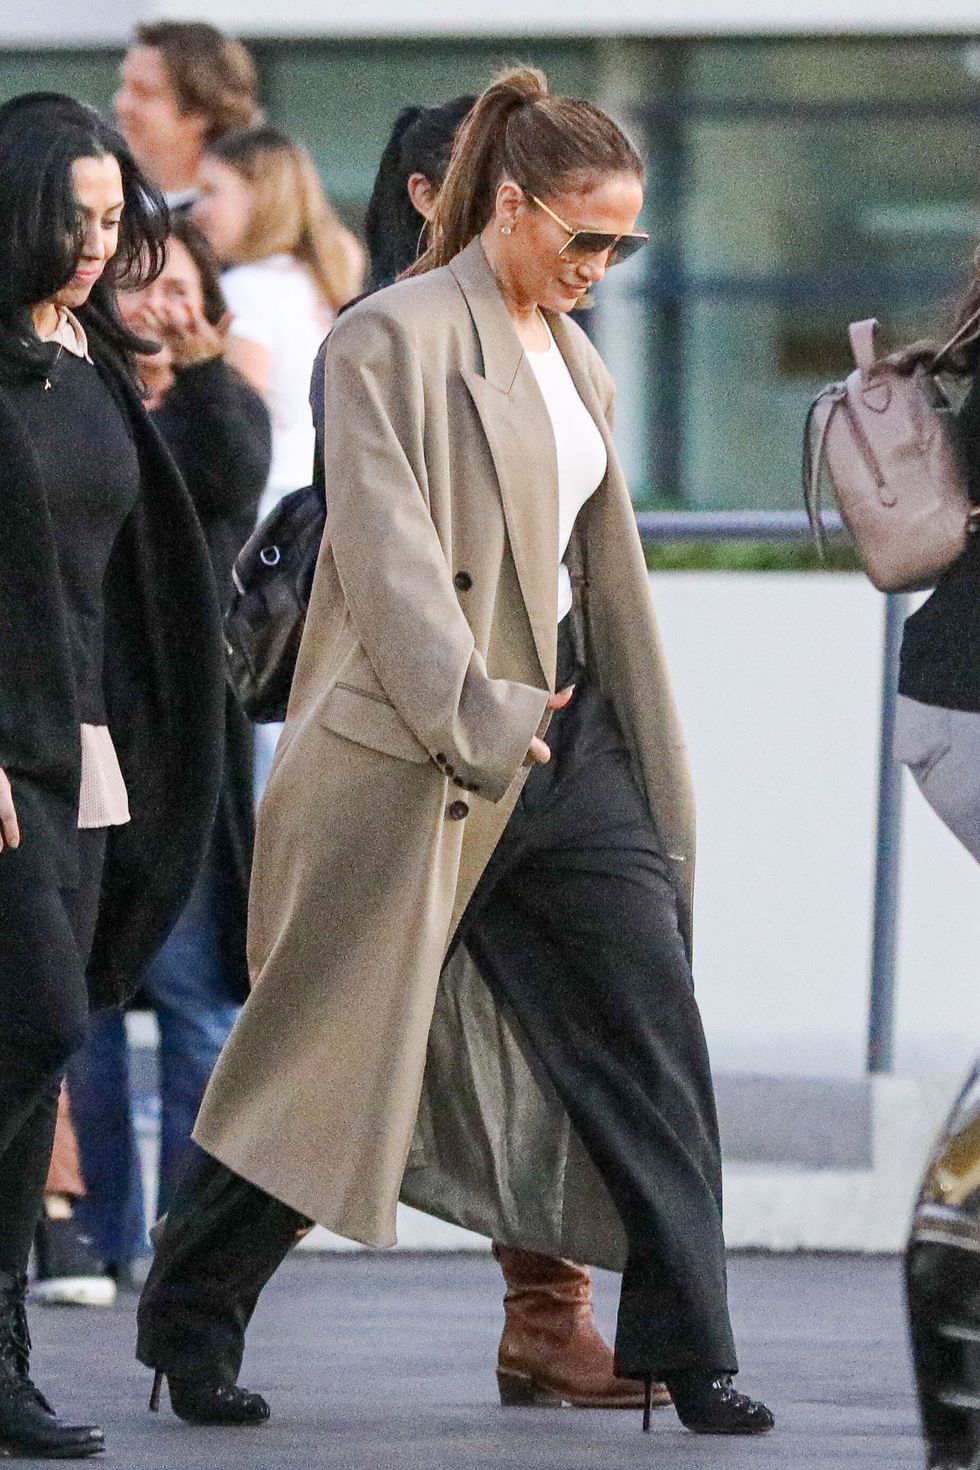 Jennifer Lopez Does Business Casual in a Baggy Suit and Heels